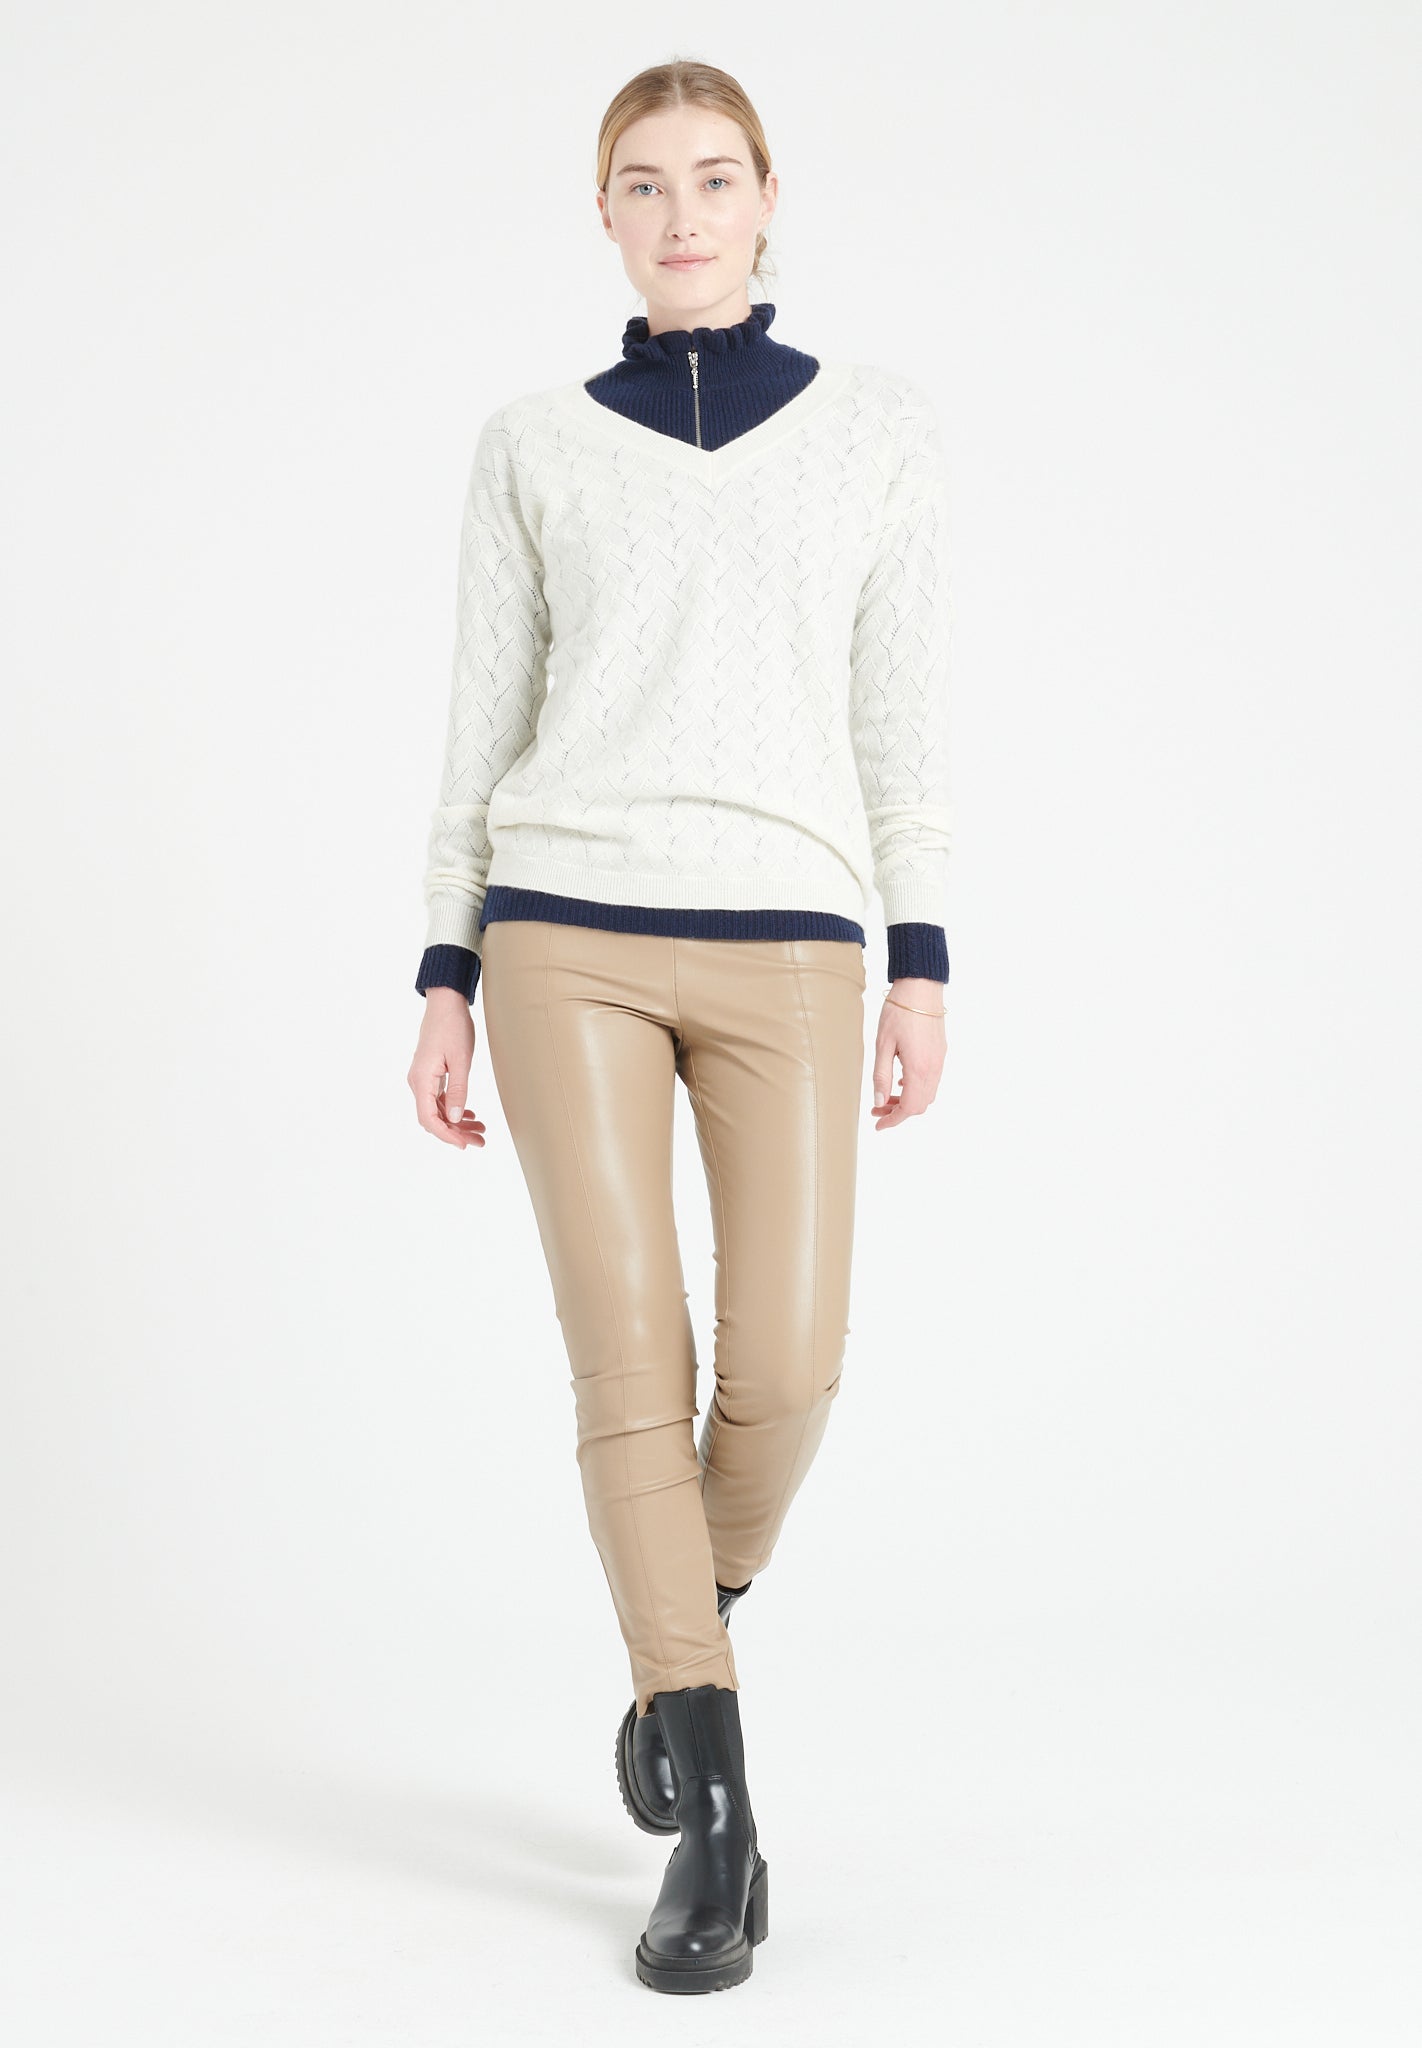 Pure Cashmere Open Knit V-Neck Sweater (Lilly 27)